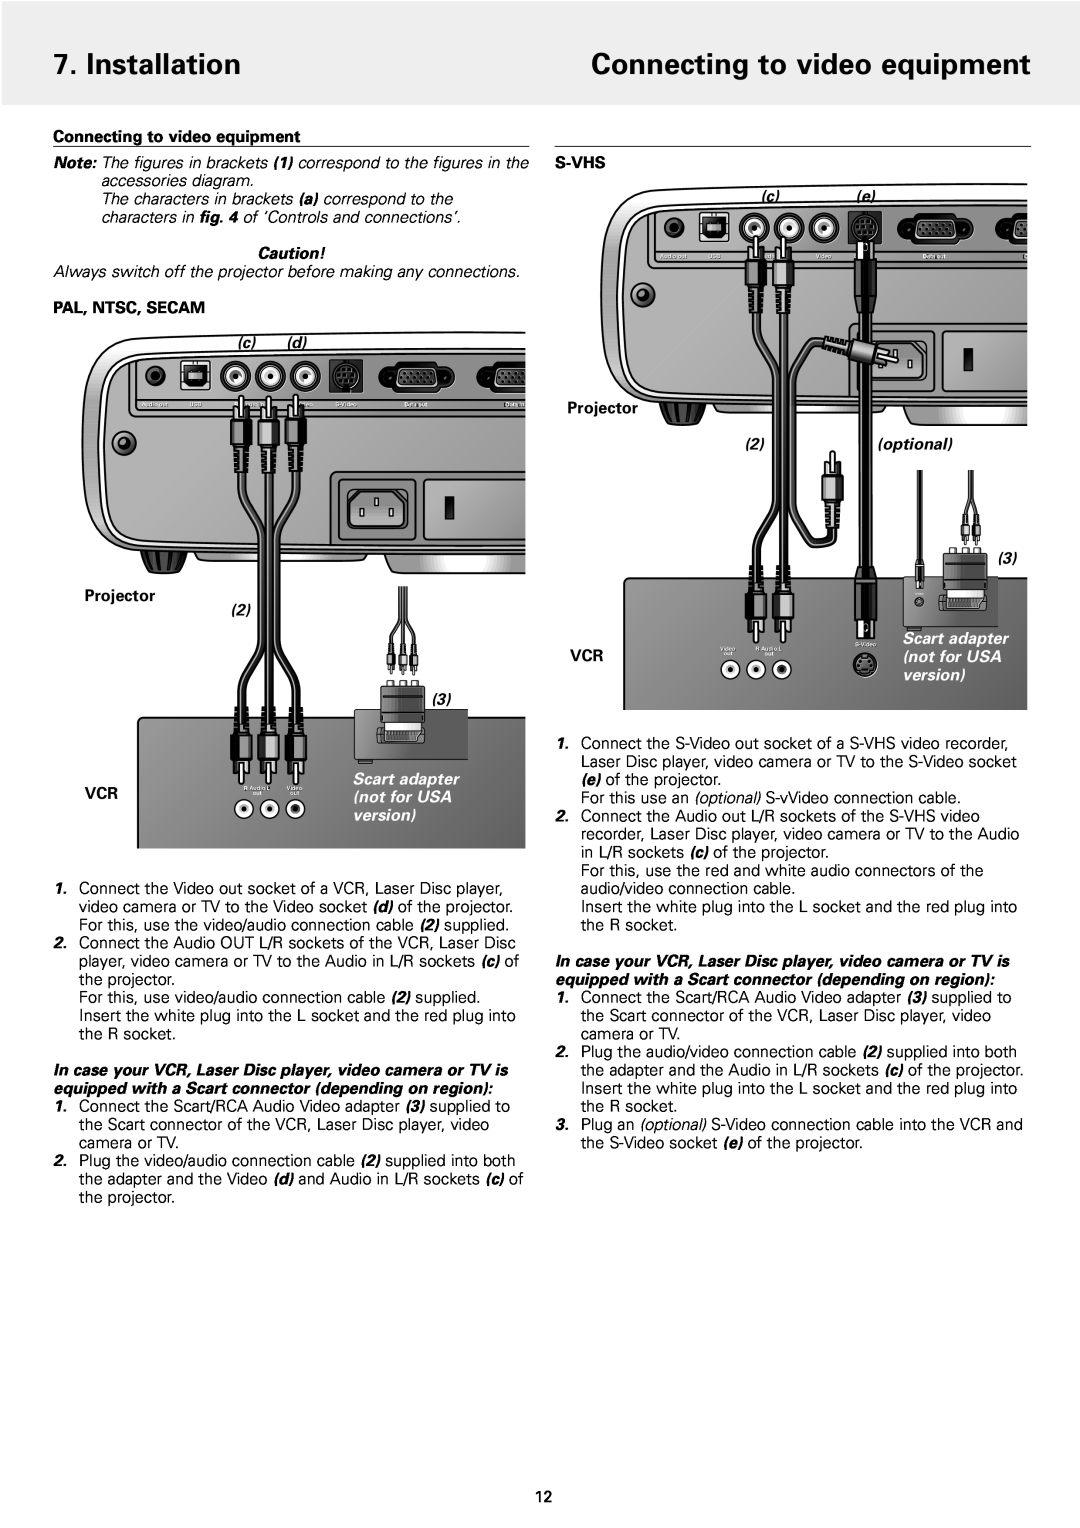 Philips Connecting to video equipment, Installation, Note The figures in brackets 1 correspond to the figures in the 